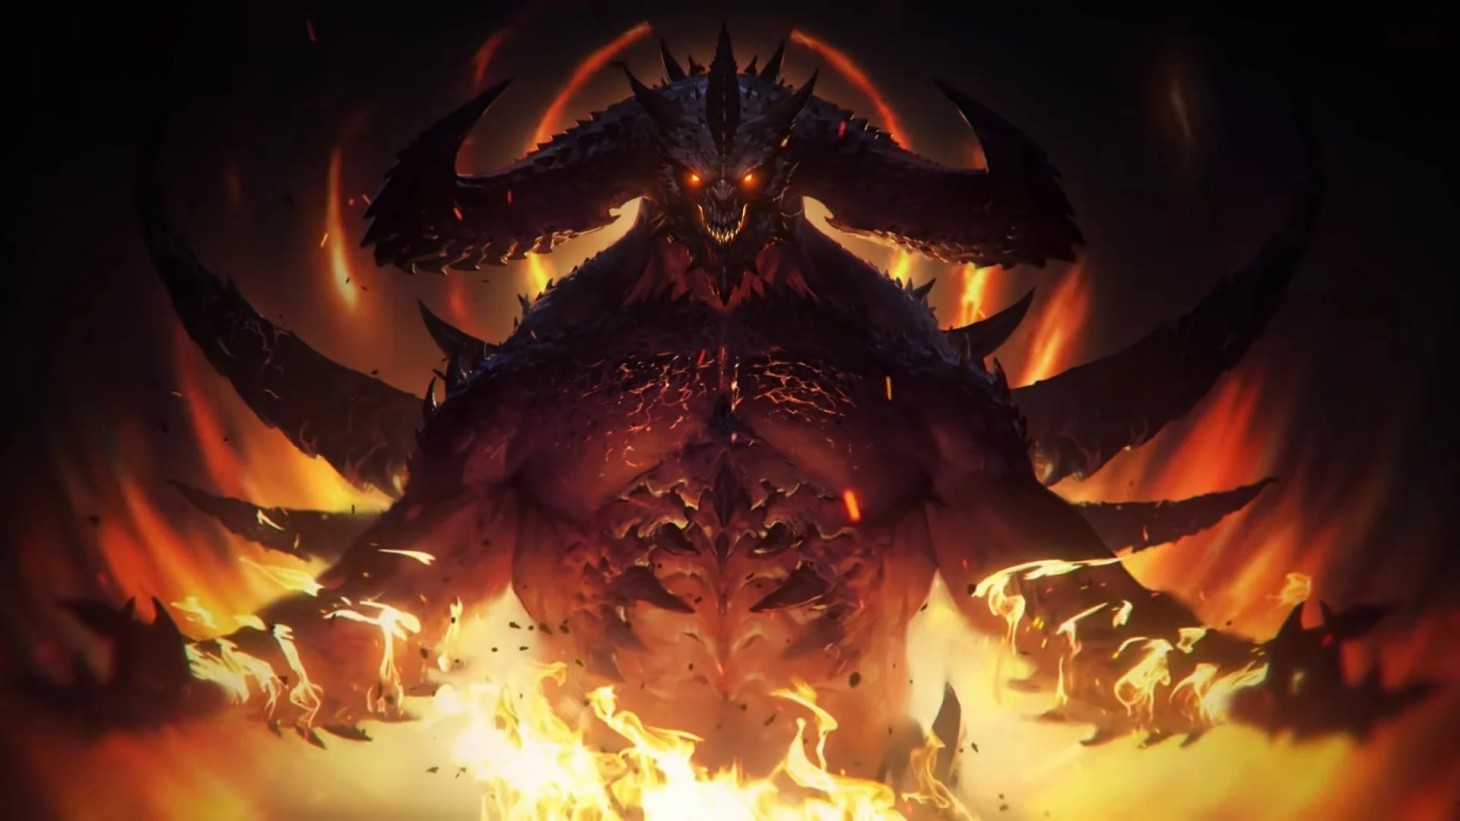 Pay-To-Win Mechanics Are Turning Fans Against Diablo Immortal